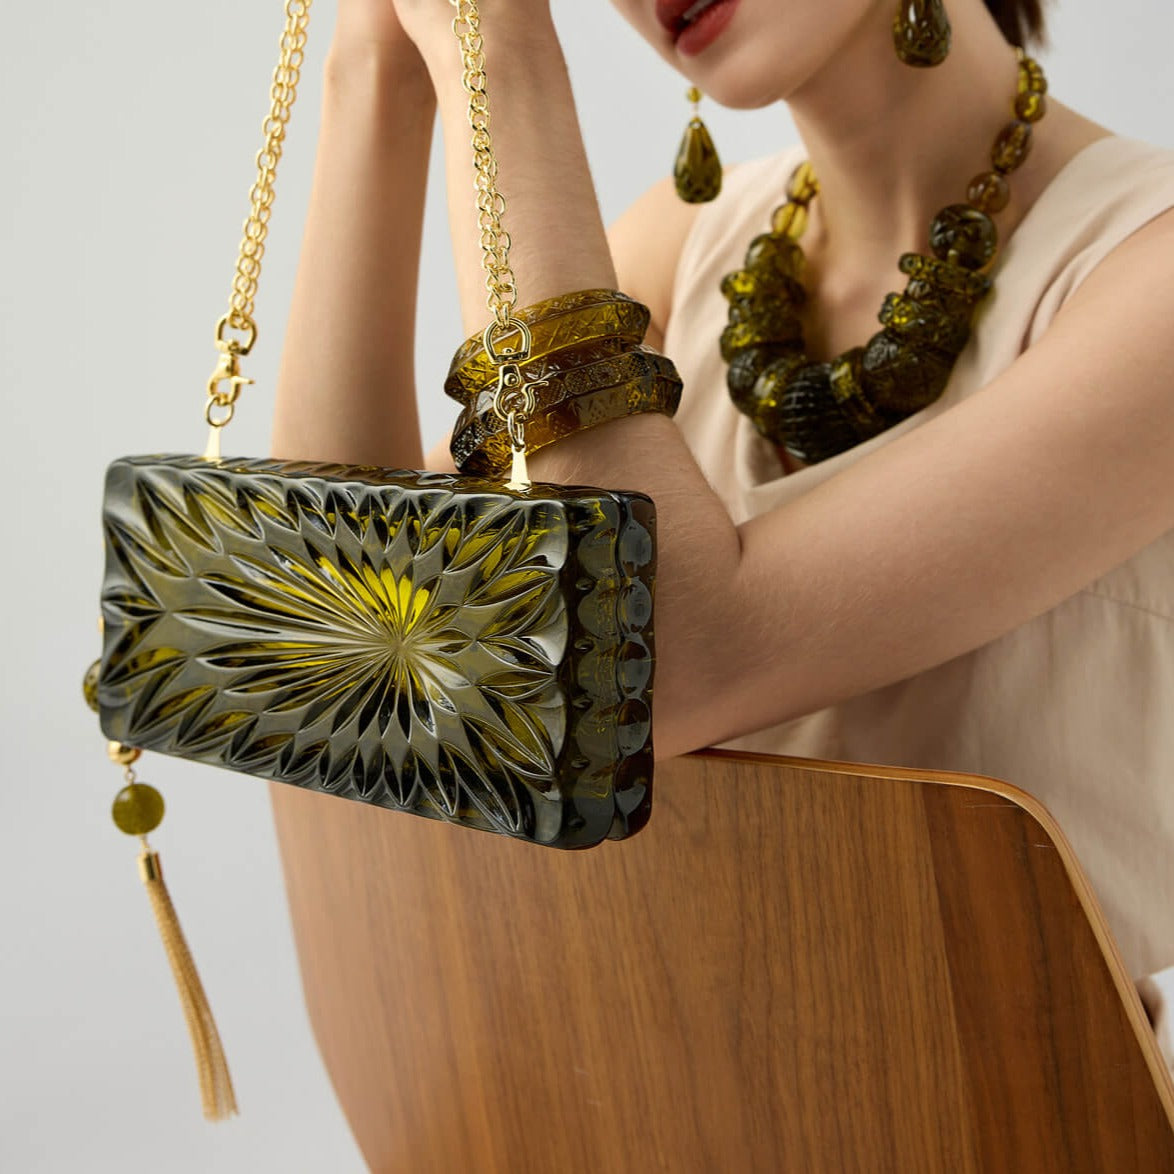 NEW IN Long Rectangle Clutch Olive